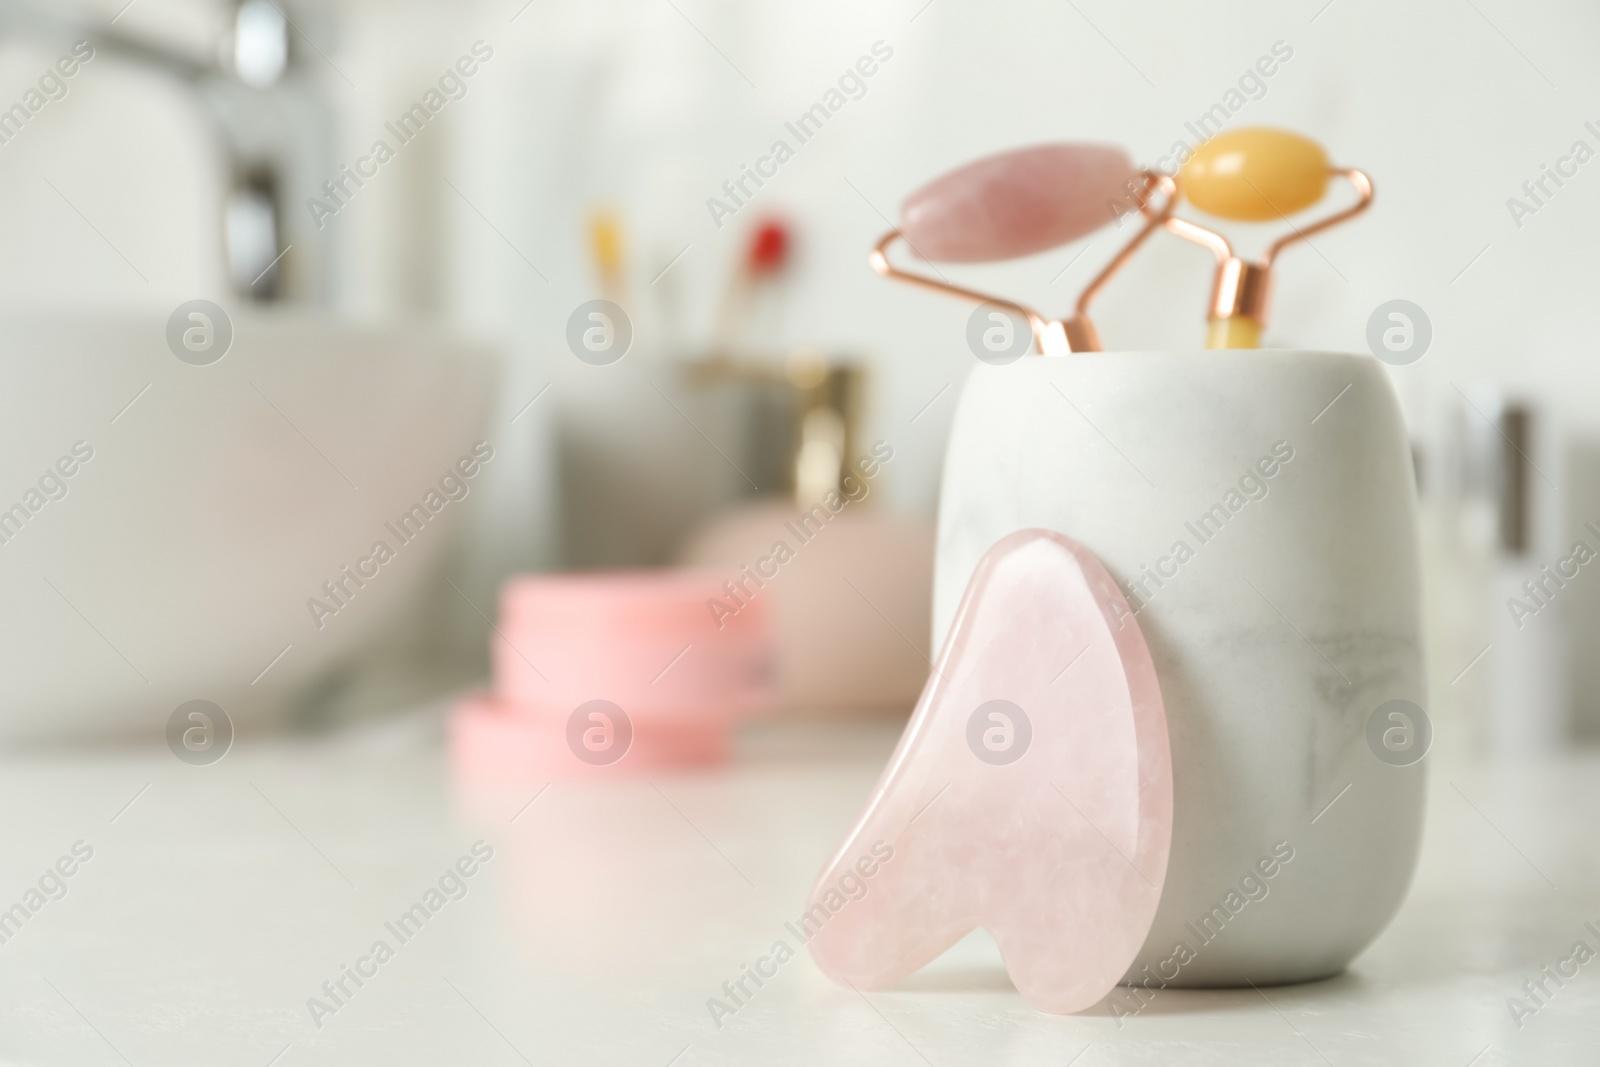 Photo of Rose quartz gua sha tool near holder with natural face rollers on white countertop in bathroom. Space for text